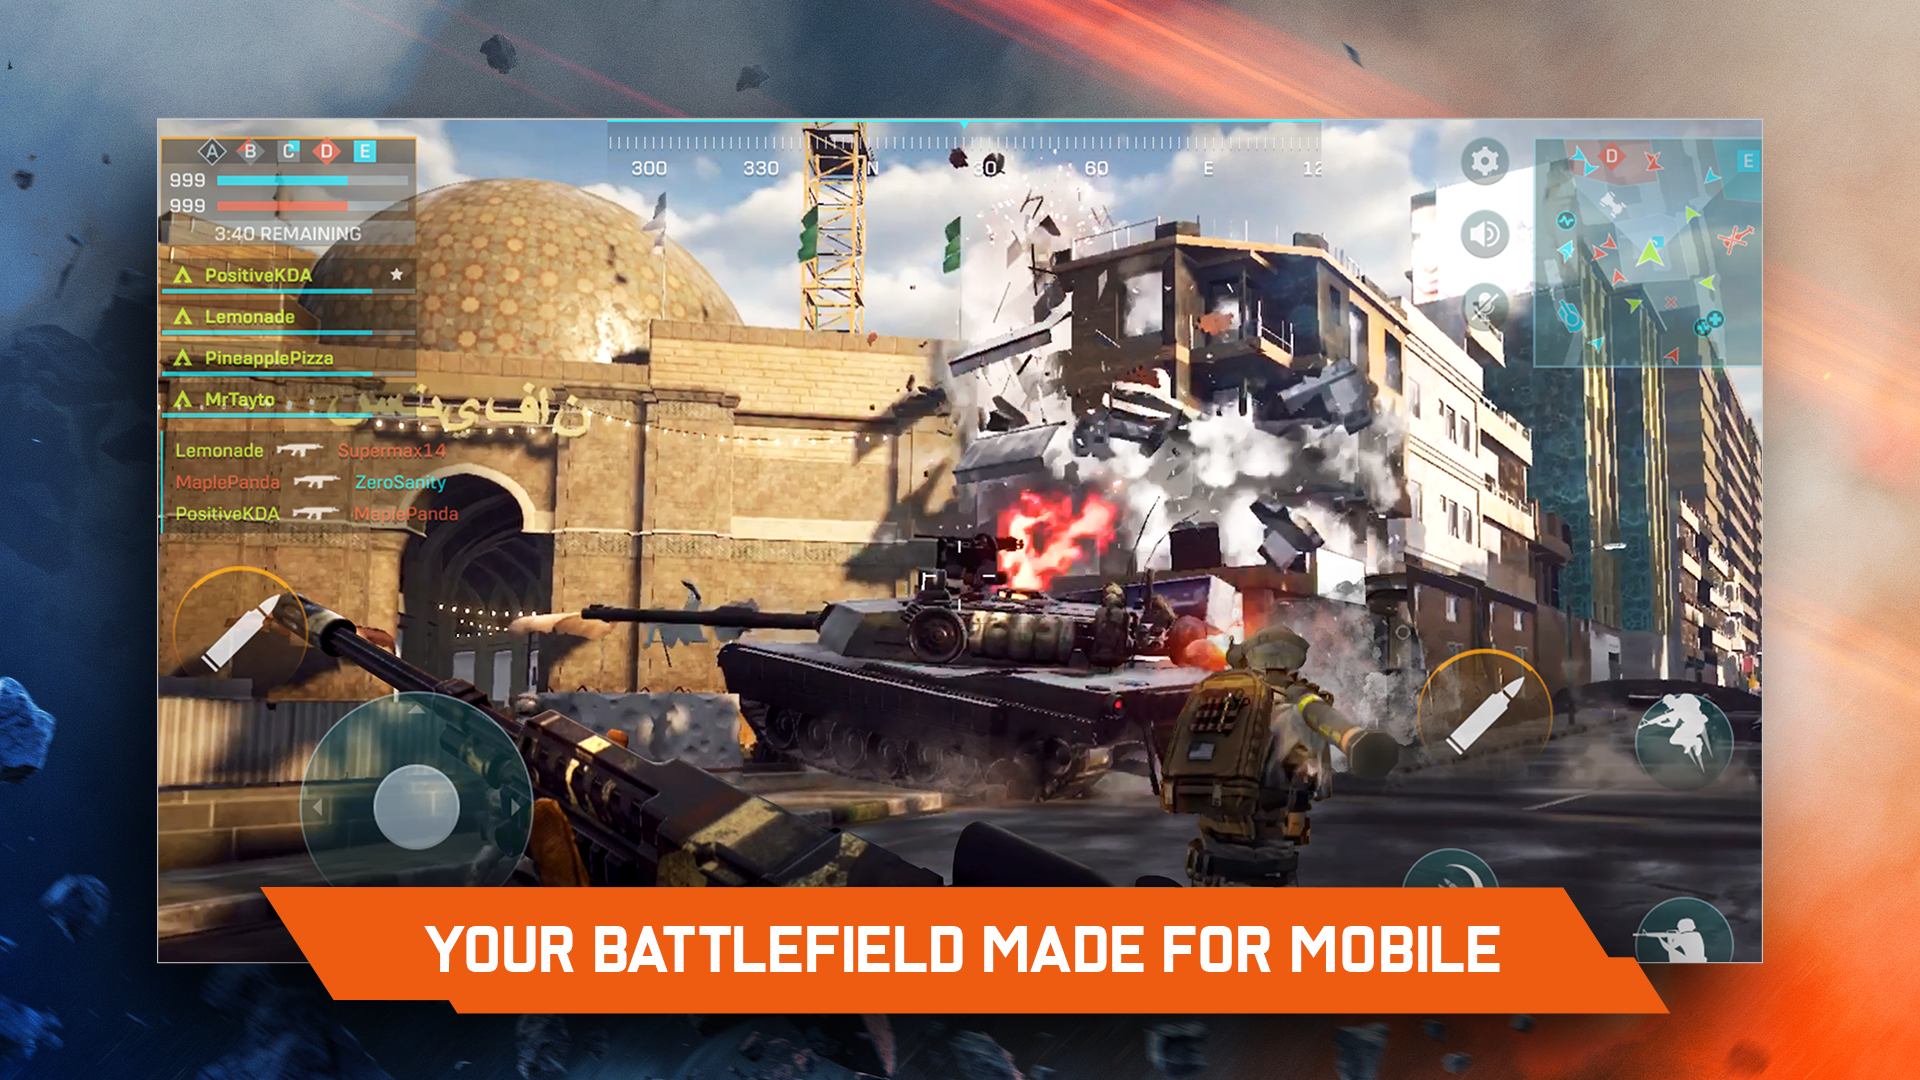 Beta Testing is Live in Certain Regions for Battlefield Mobile, As Announced by Electronic Arts